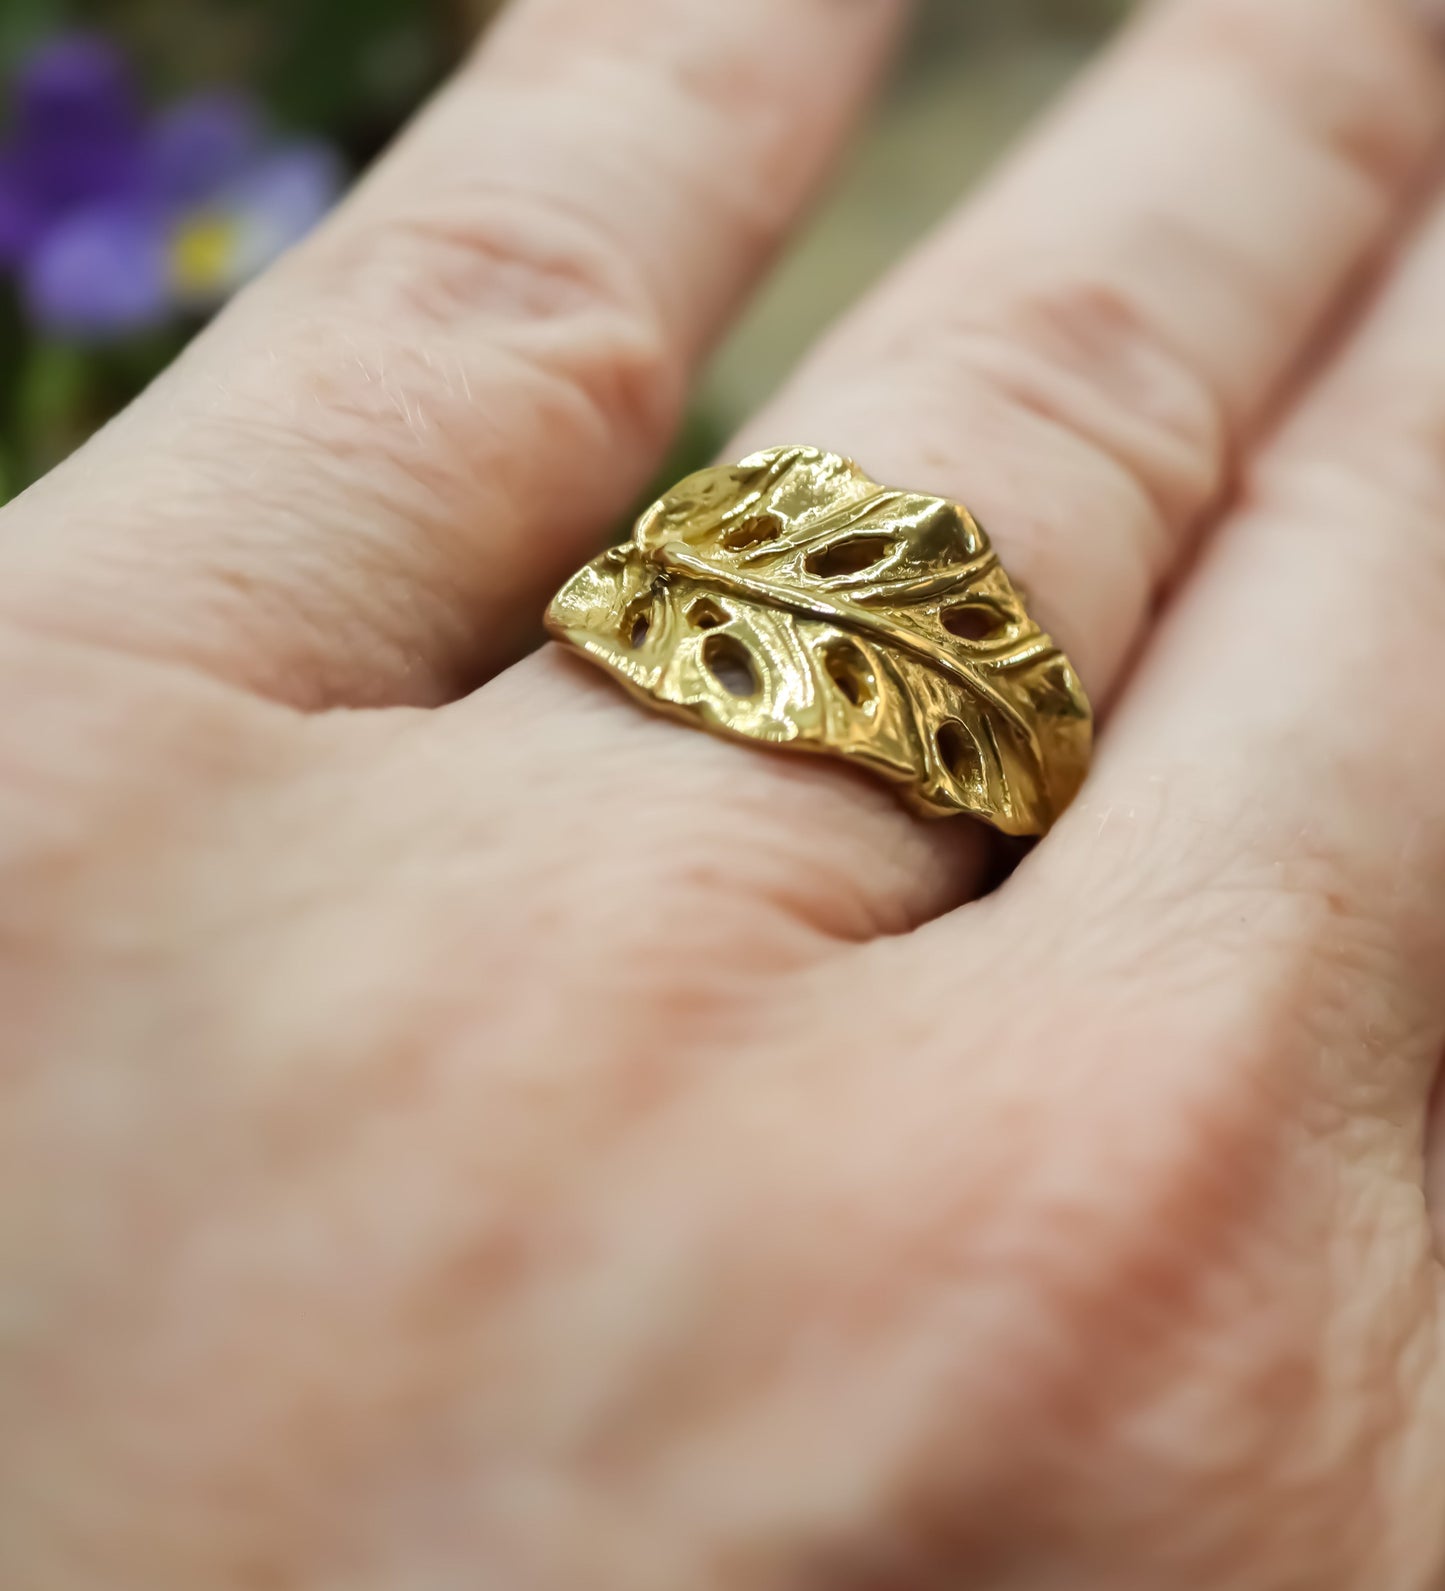 The Adansonii Ring 18ct Gold Plated